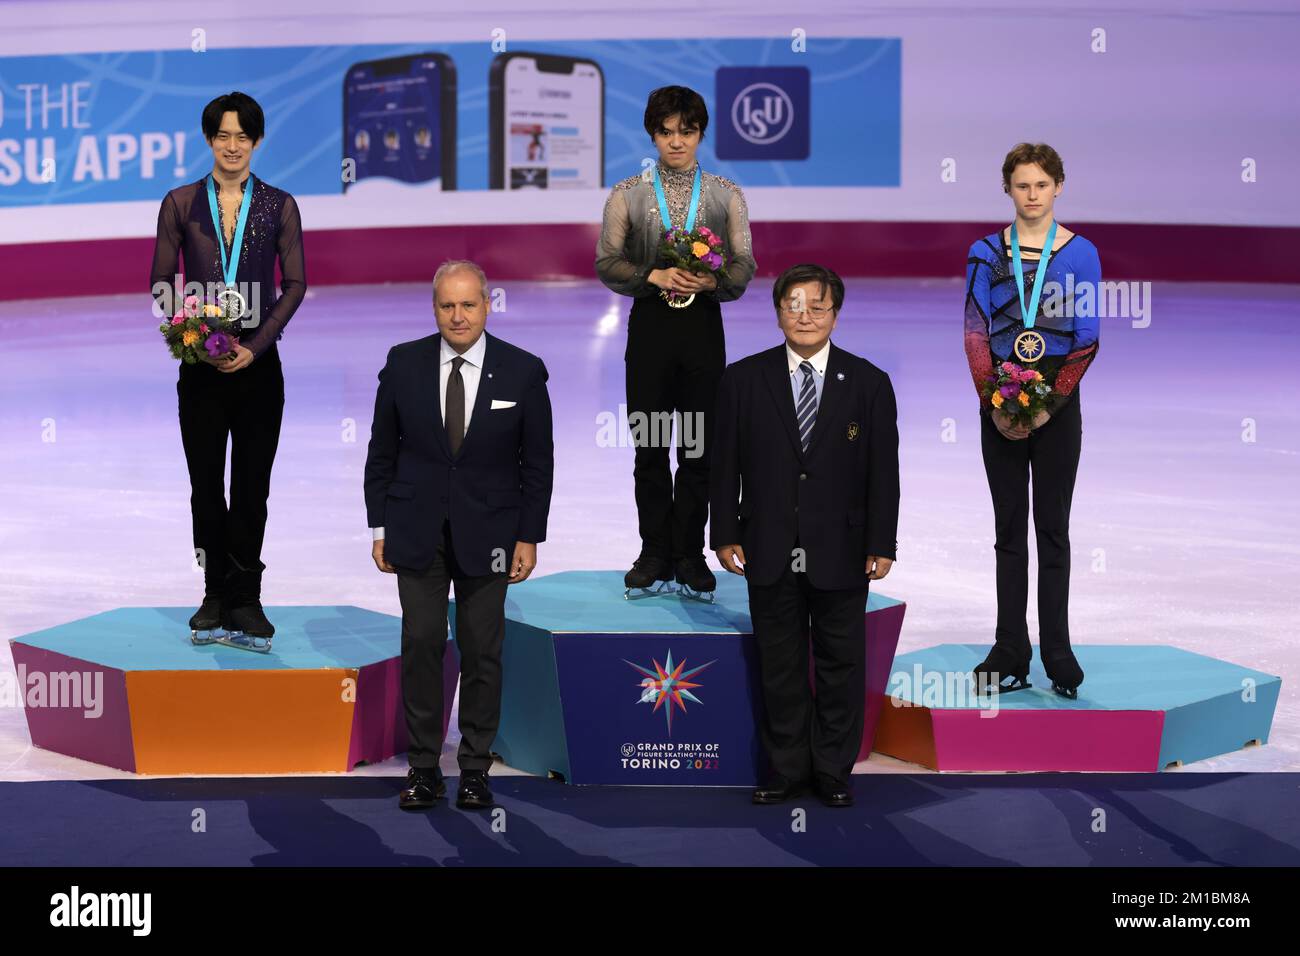 Turin, Italy. 10th Dec, 2022. Men's Medalists ( L to R ); Sota Yamamoto of Japan ( Silver ), Shoma Uno of Japan ( Gold ) and Ilia Malinin of USA ( Bronze ) pictured on the Winners' Podium along with ( lower left ) Andrea Gios President of the Italian Ice Sports Federation ( FISG ) and ( lower right ) Mr. Tatsuro Matsumura of ISU Development Commission Palavela, Turin. Picture date: 10th December 2022. Picture credit should read: Jonathan Moscrop/Sportimage Credit: Sportimage/Alamy Live News Stock Photo